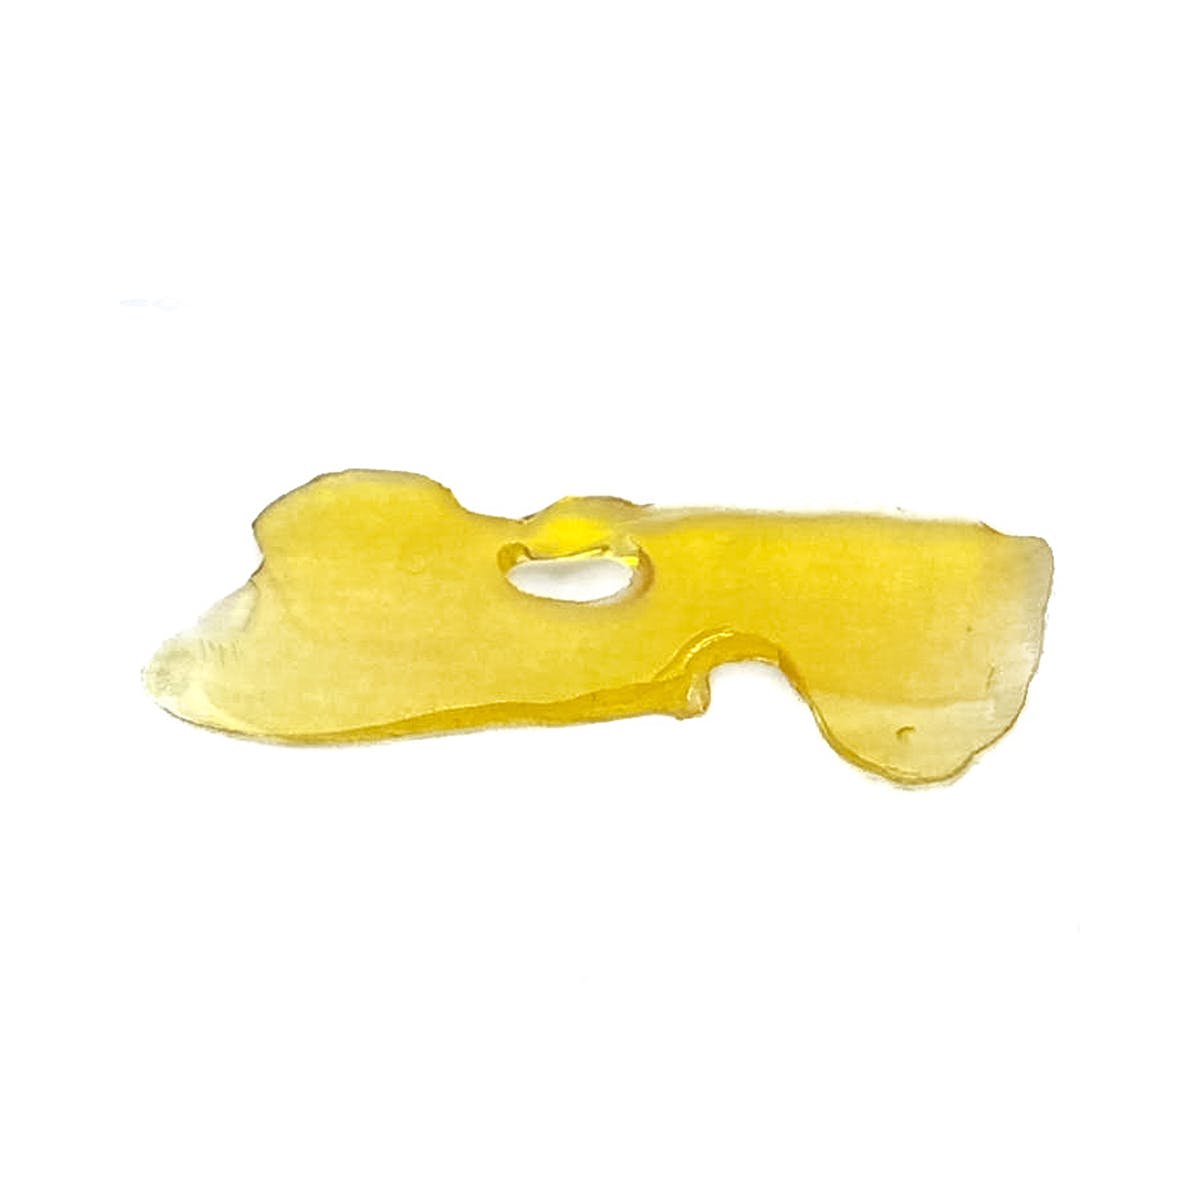 marijuana-dispensaries-cathedral-city-care-collective-north-in-cathedral-city-strawnana-live-resin-shatter